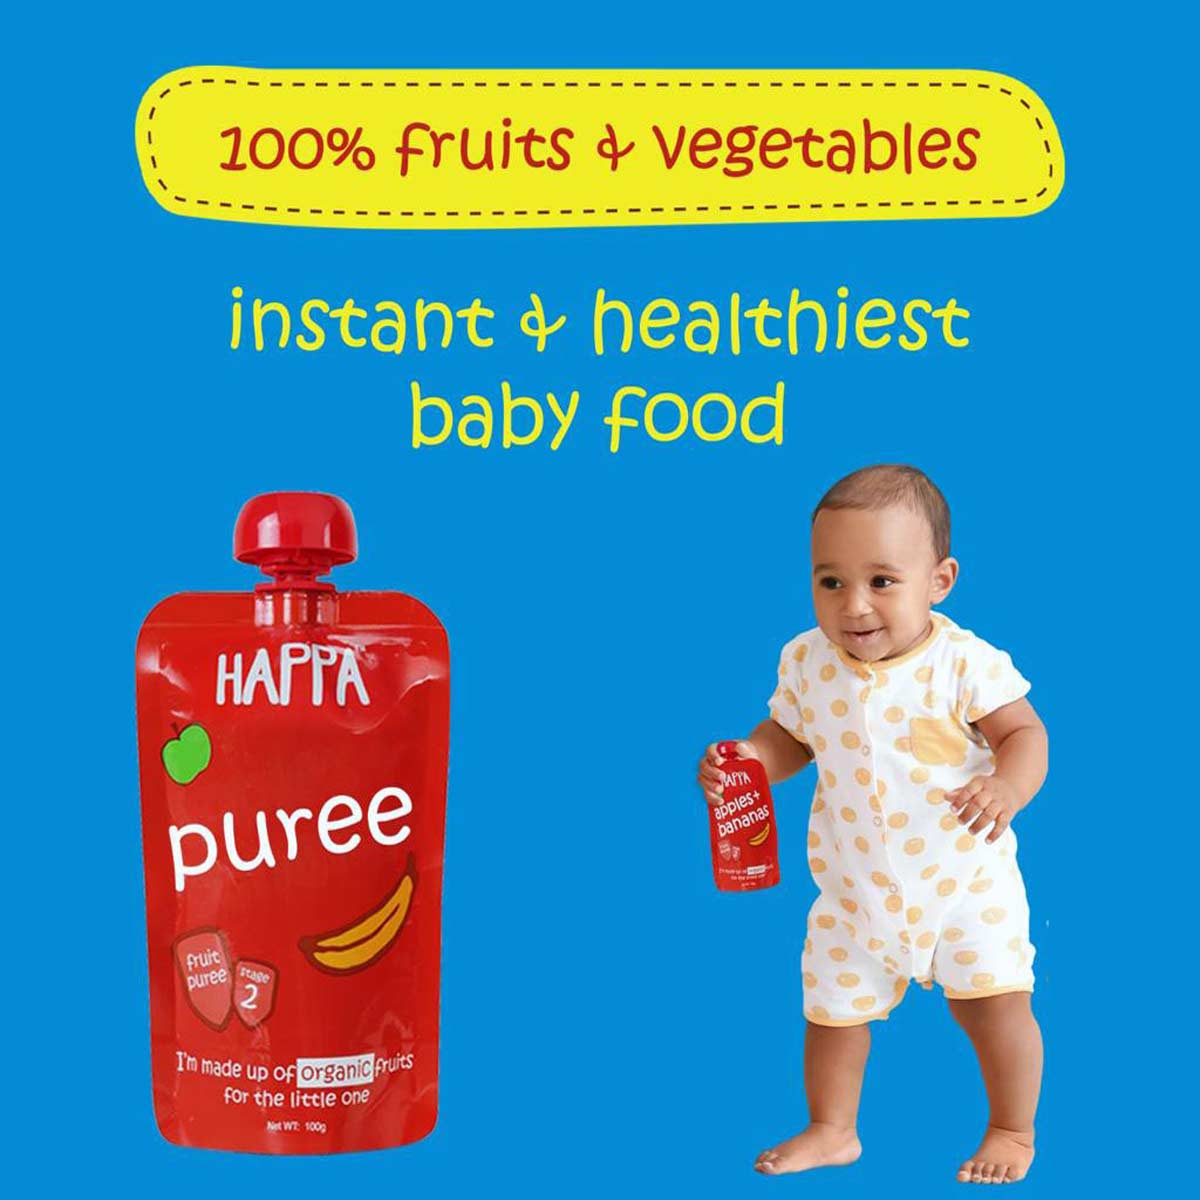 Happa fruit, grains and vegetable puree baby food - trusted choice of parents for organic baby meals.